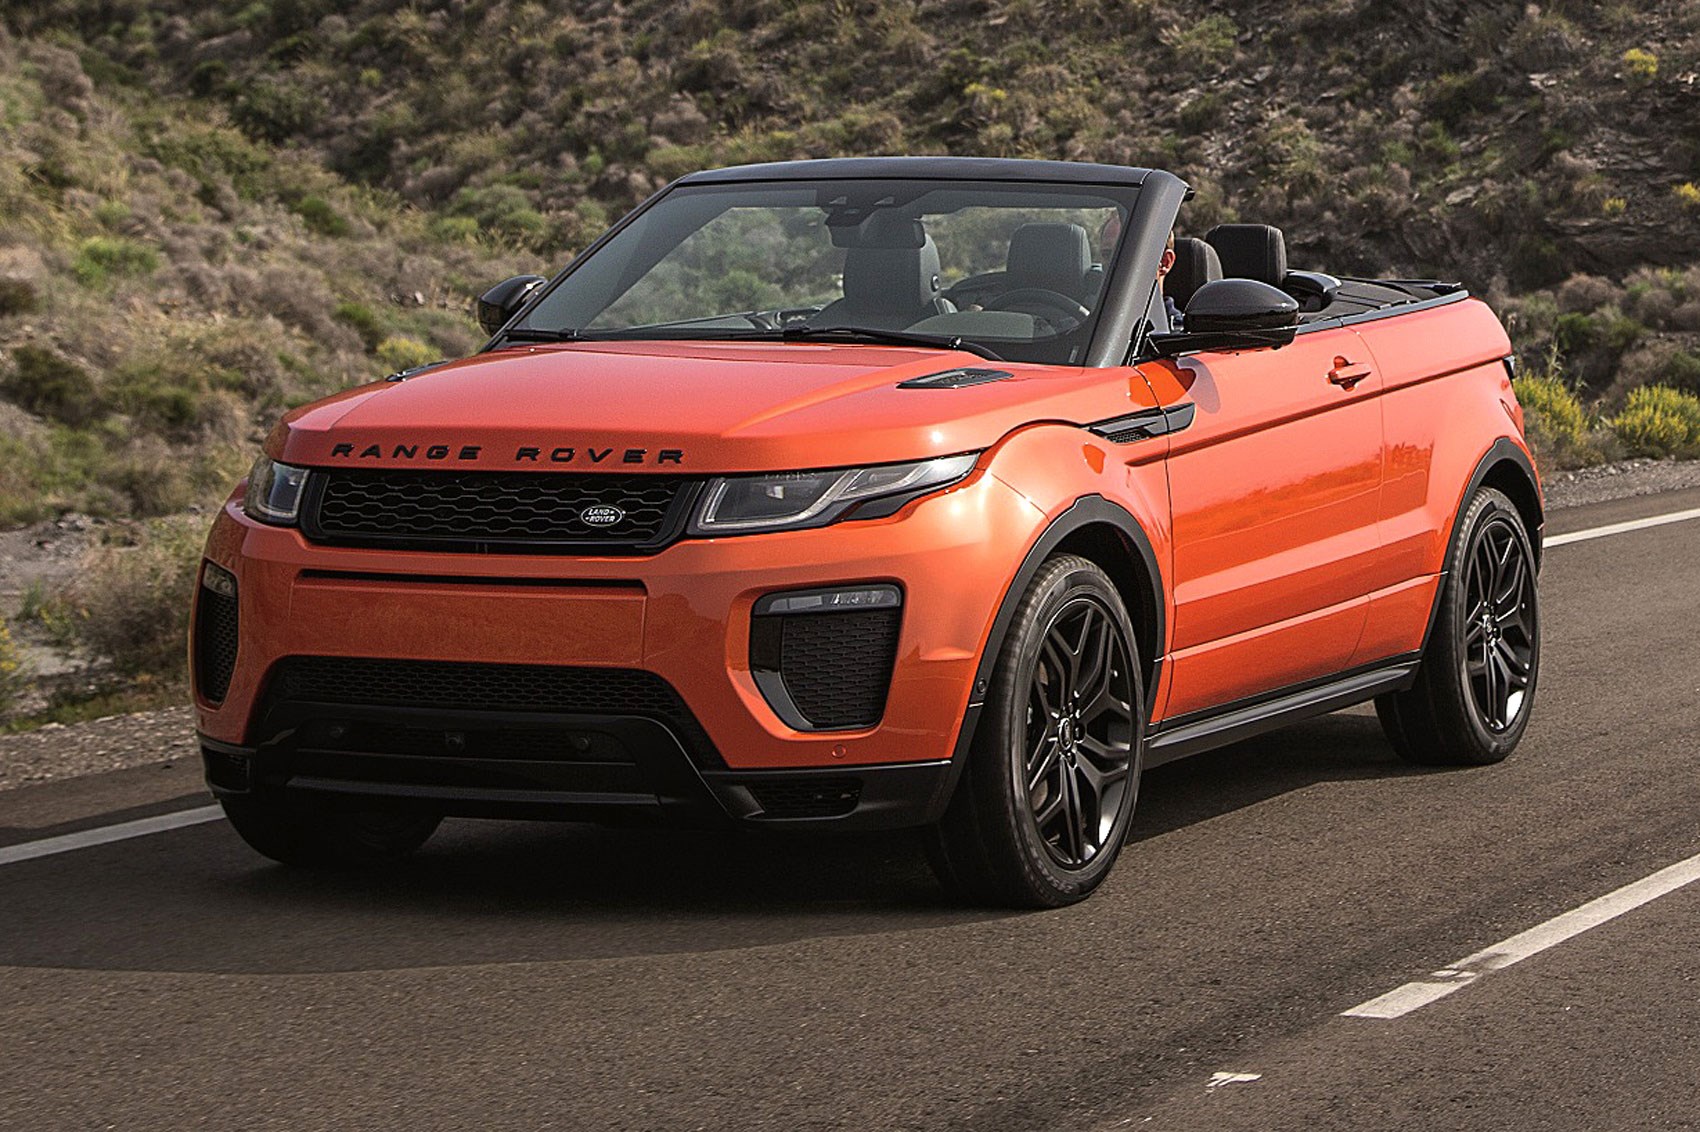 2020 Land Rover Range Rover Evoque - News, reviews, picture galleries and  videos - The Car Guide